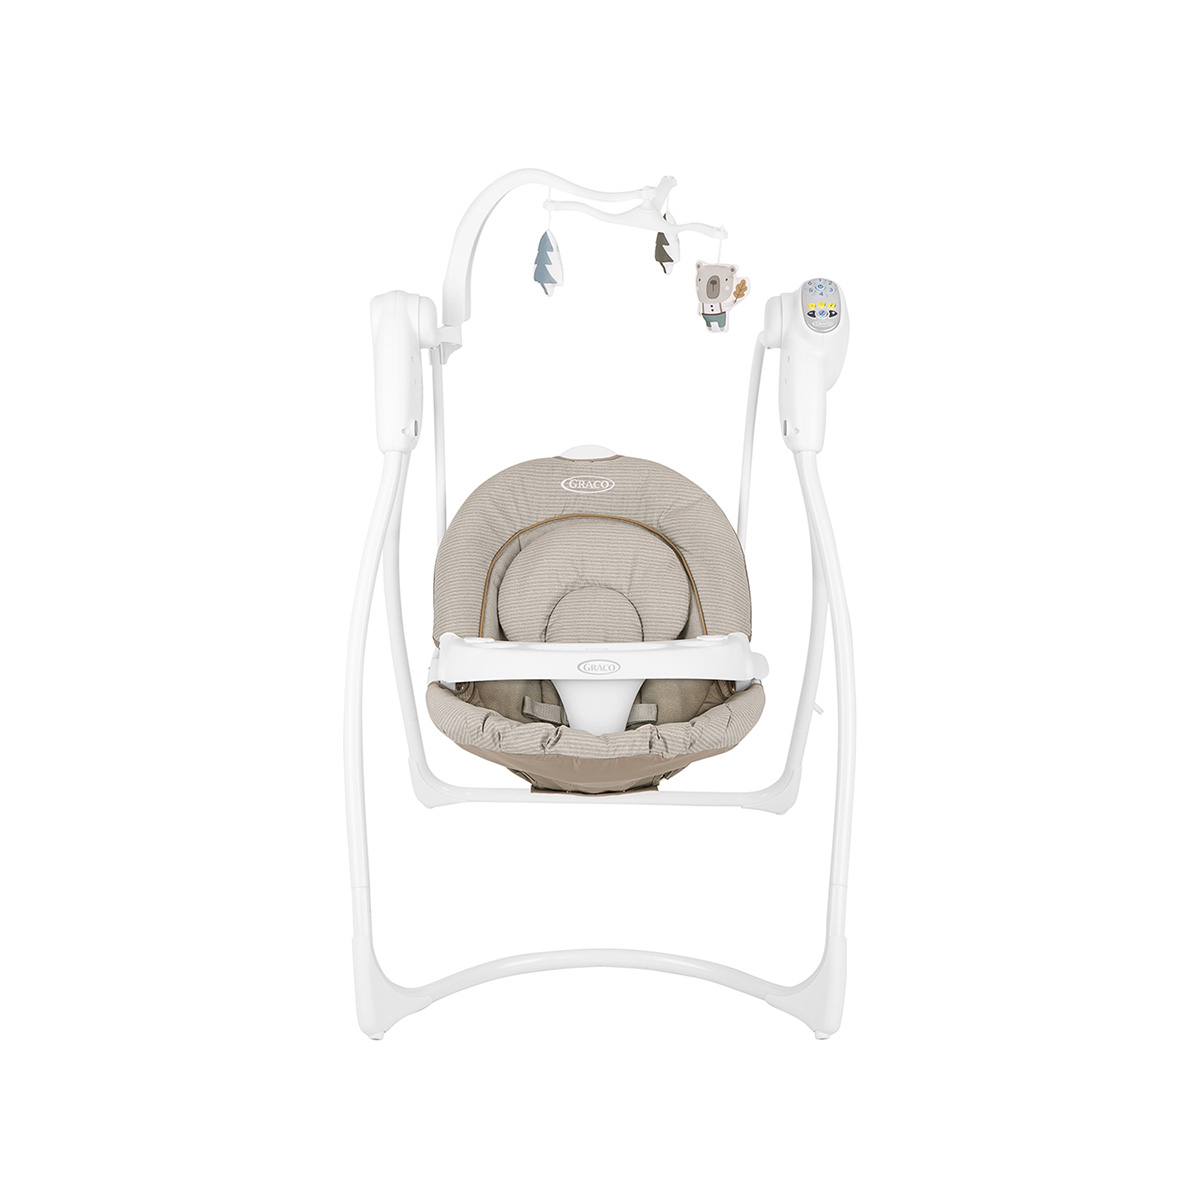 Compact With Me Portable Graco Swing | Move Baby & Easily